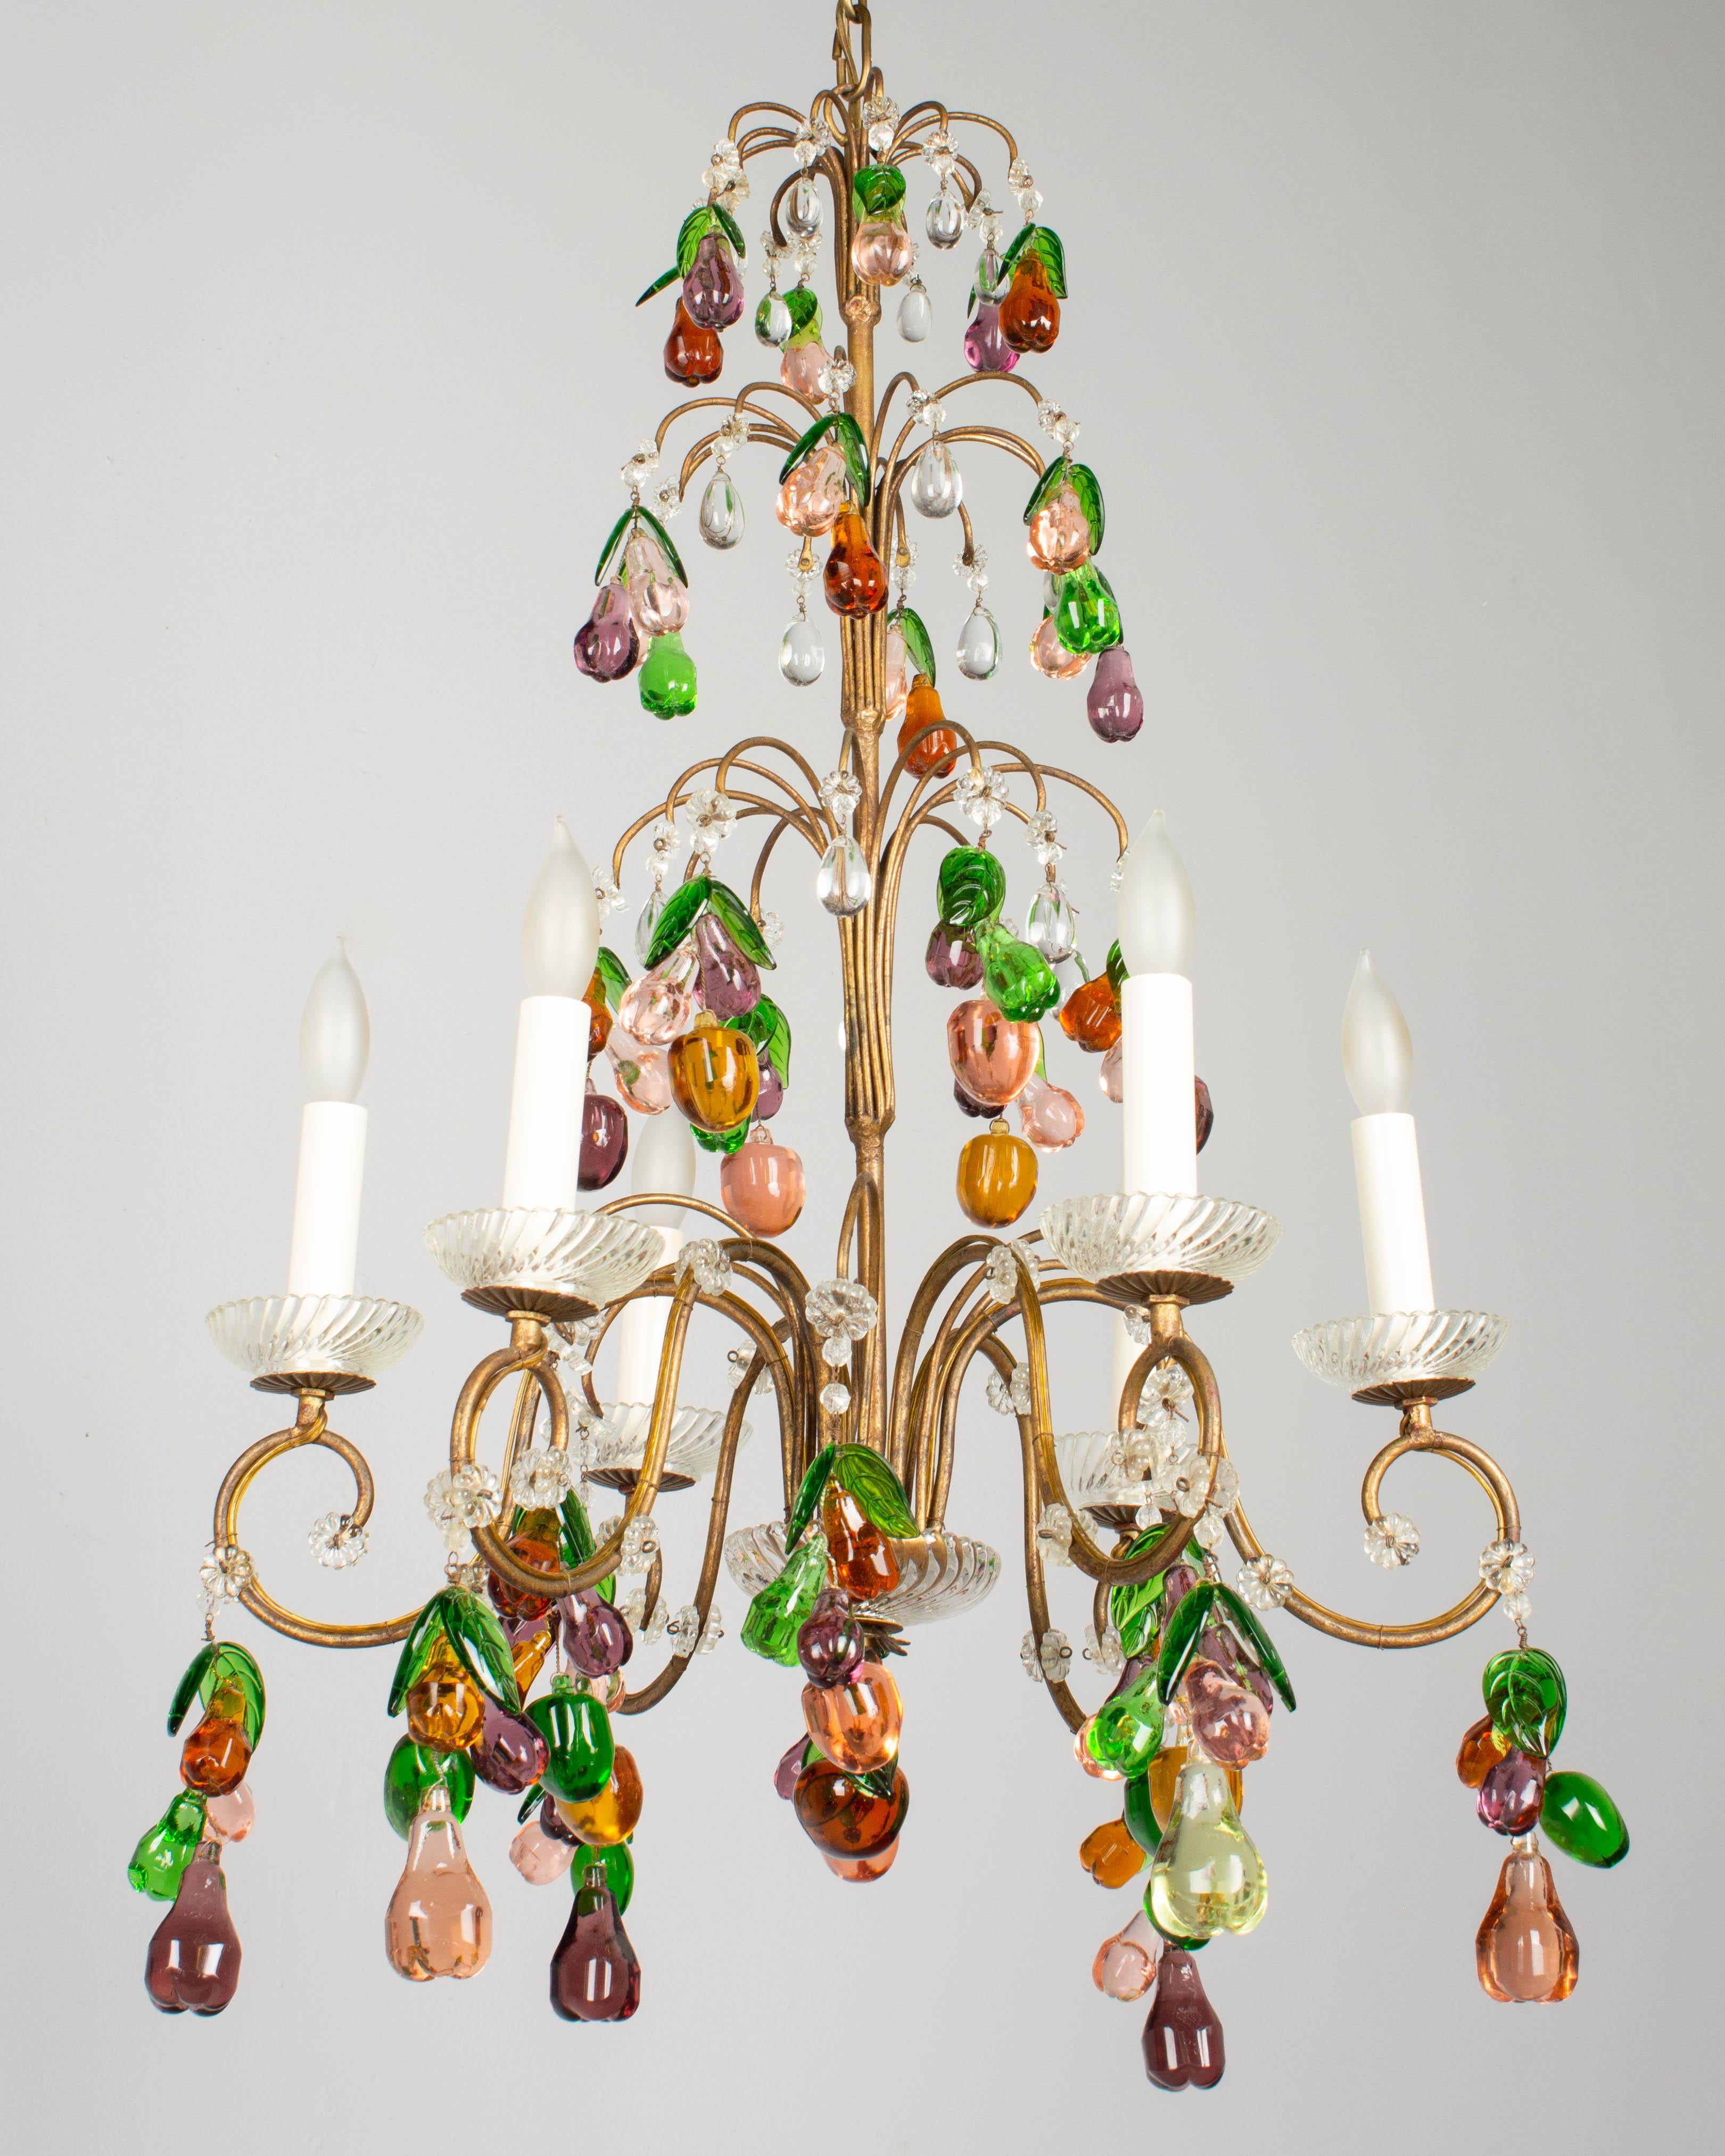 A magnificent, whimsical Italian six-light chandelier with gilded metal tiered frame dripping with colorful glass fruits. All original and completely intact. Large clusters of molded glass pears, apples and plums in amber, purple, and peach with